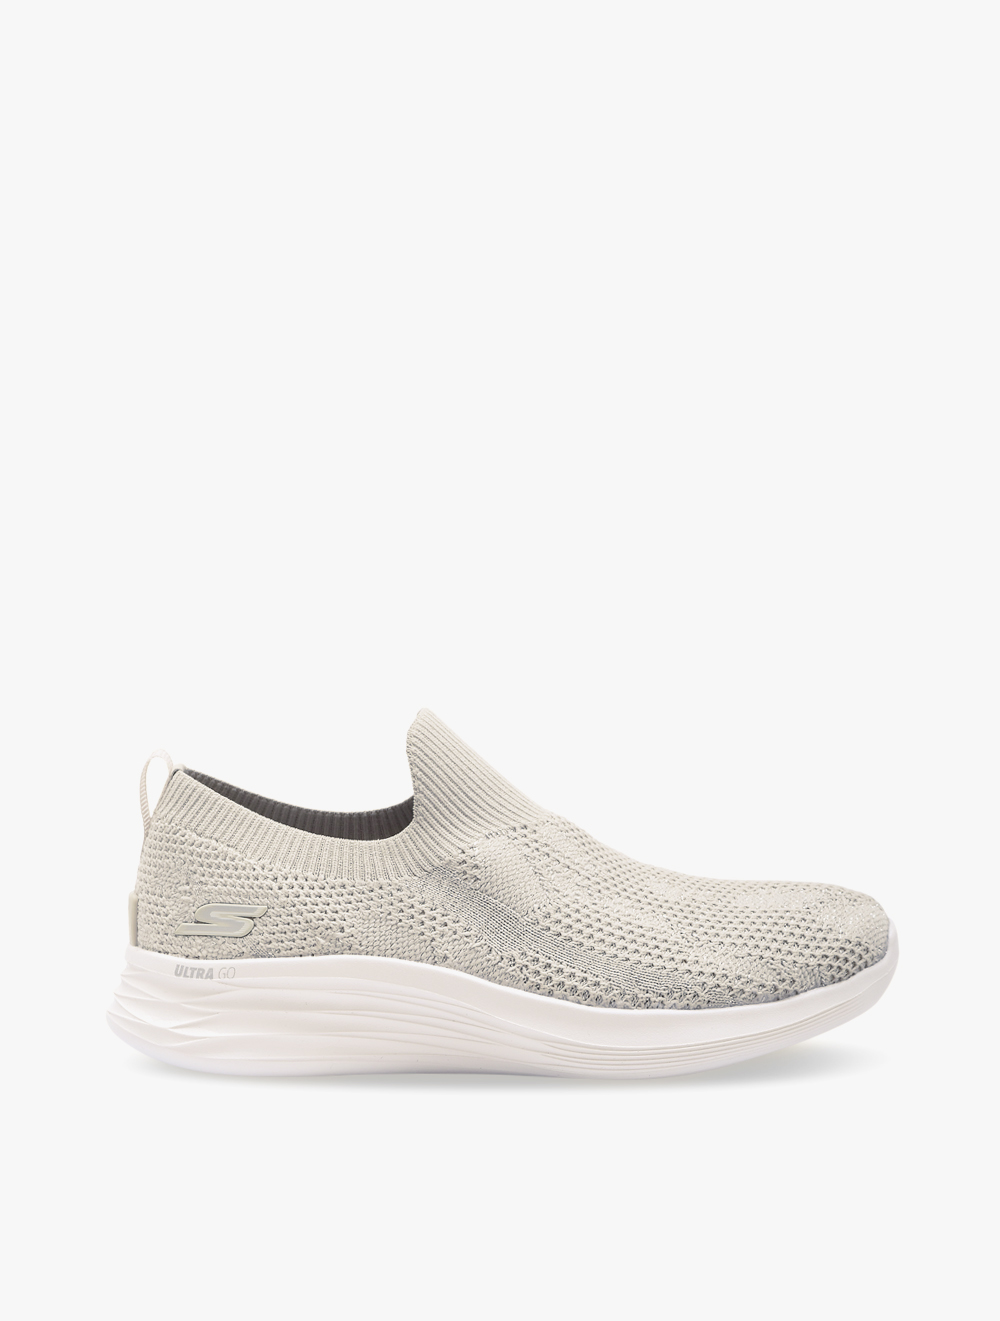 Skechers YOU Wave - Virtue Womens Sneaker Shoes - Natural